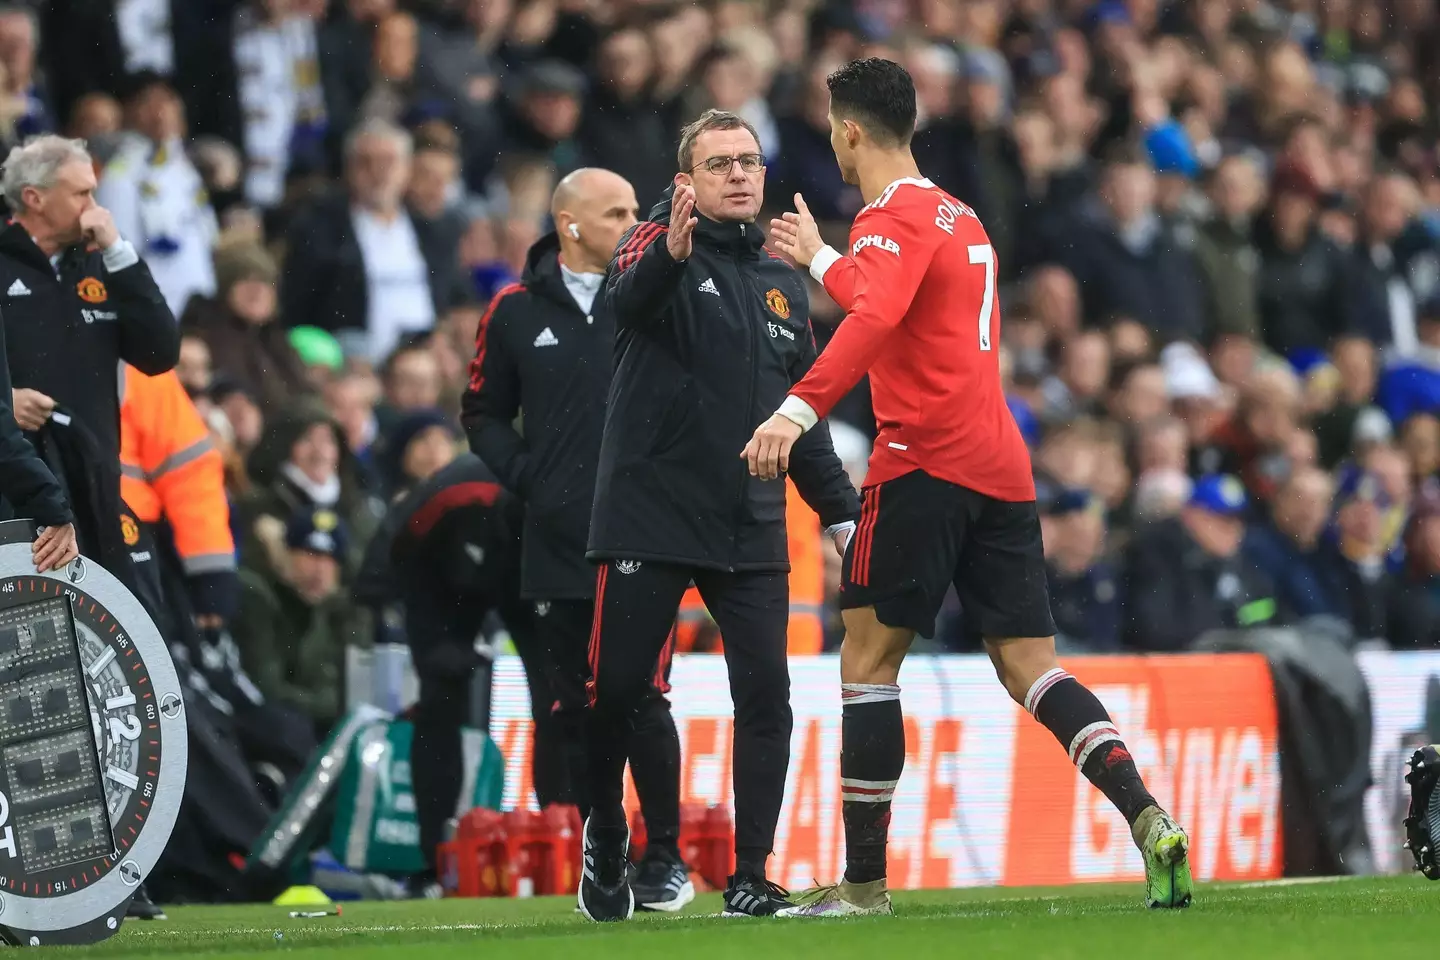 Ronaldo was subbed off against Leeds by Rangnick. Image: PA Images